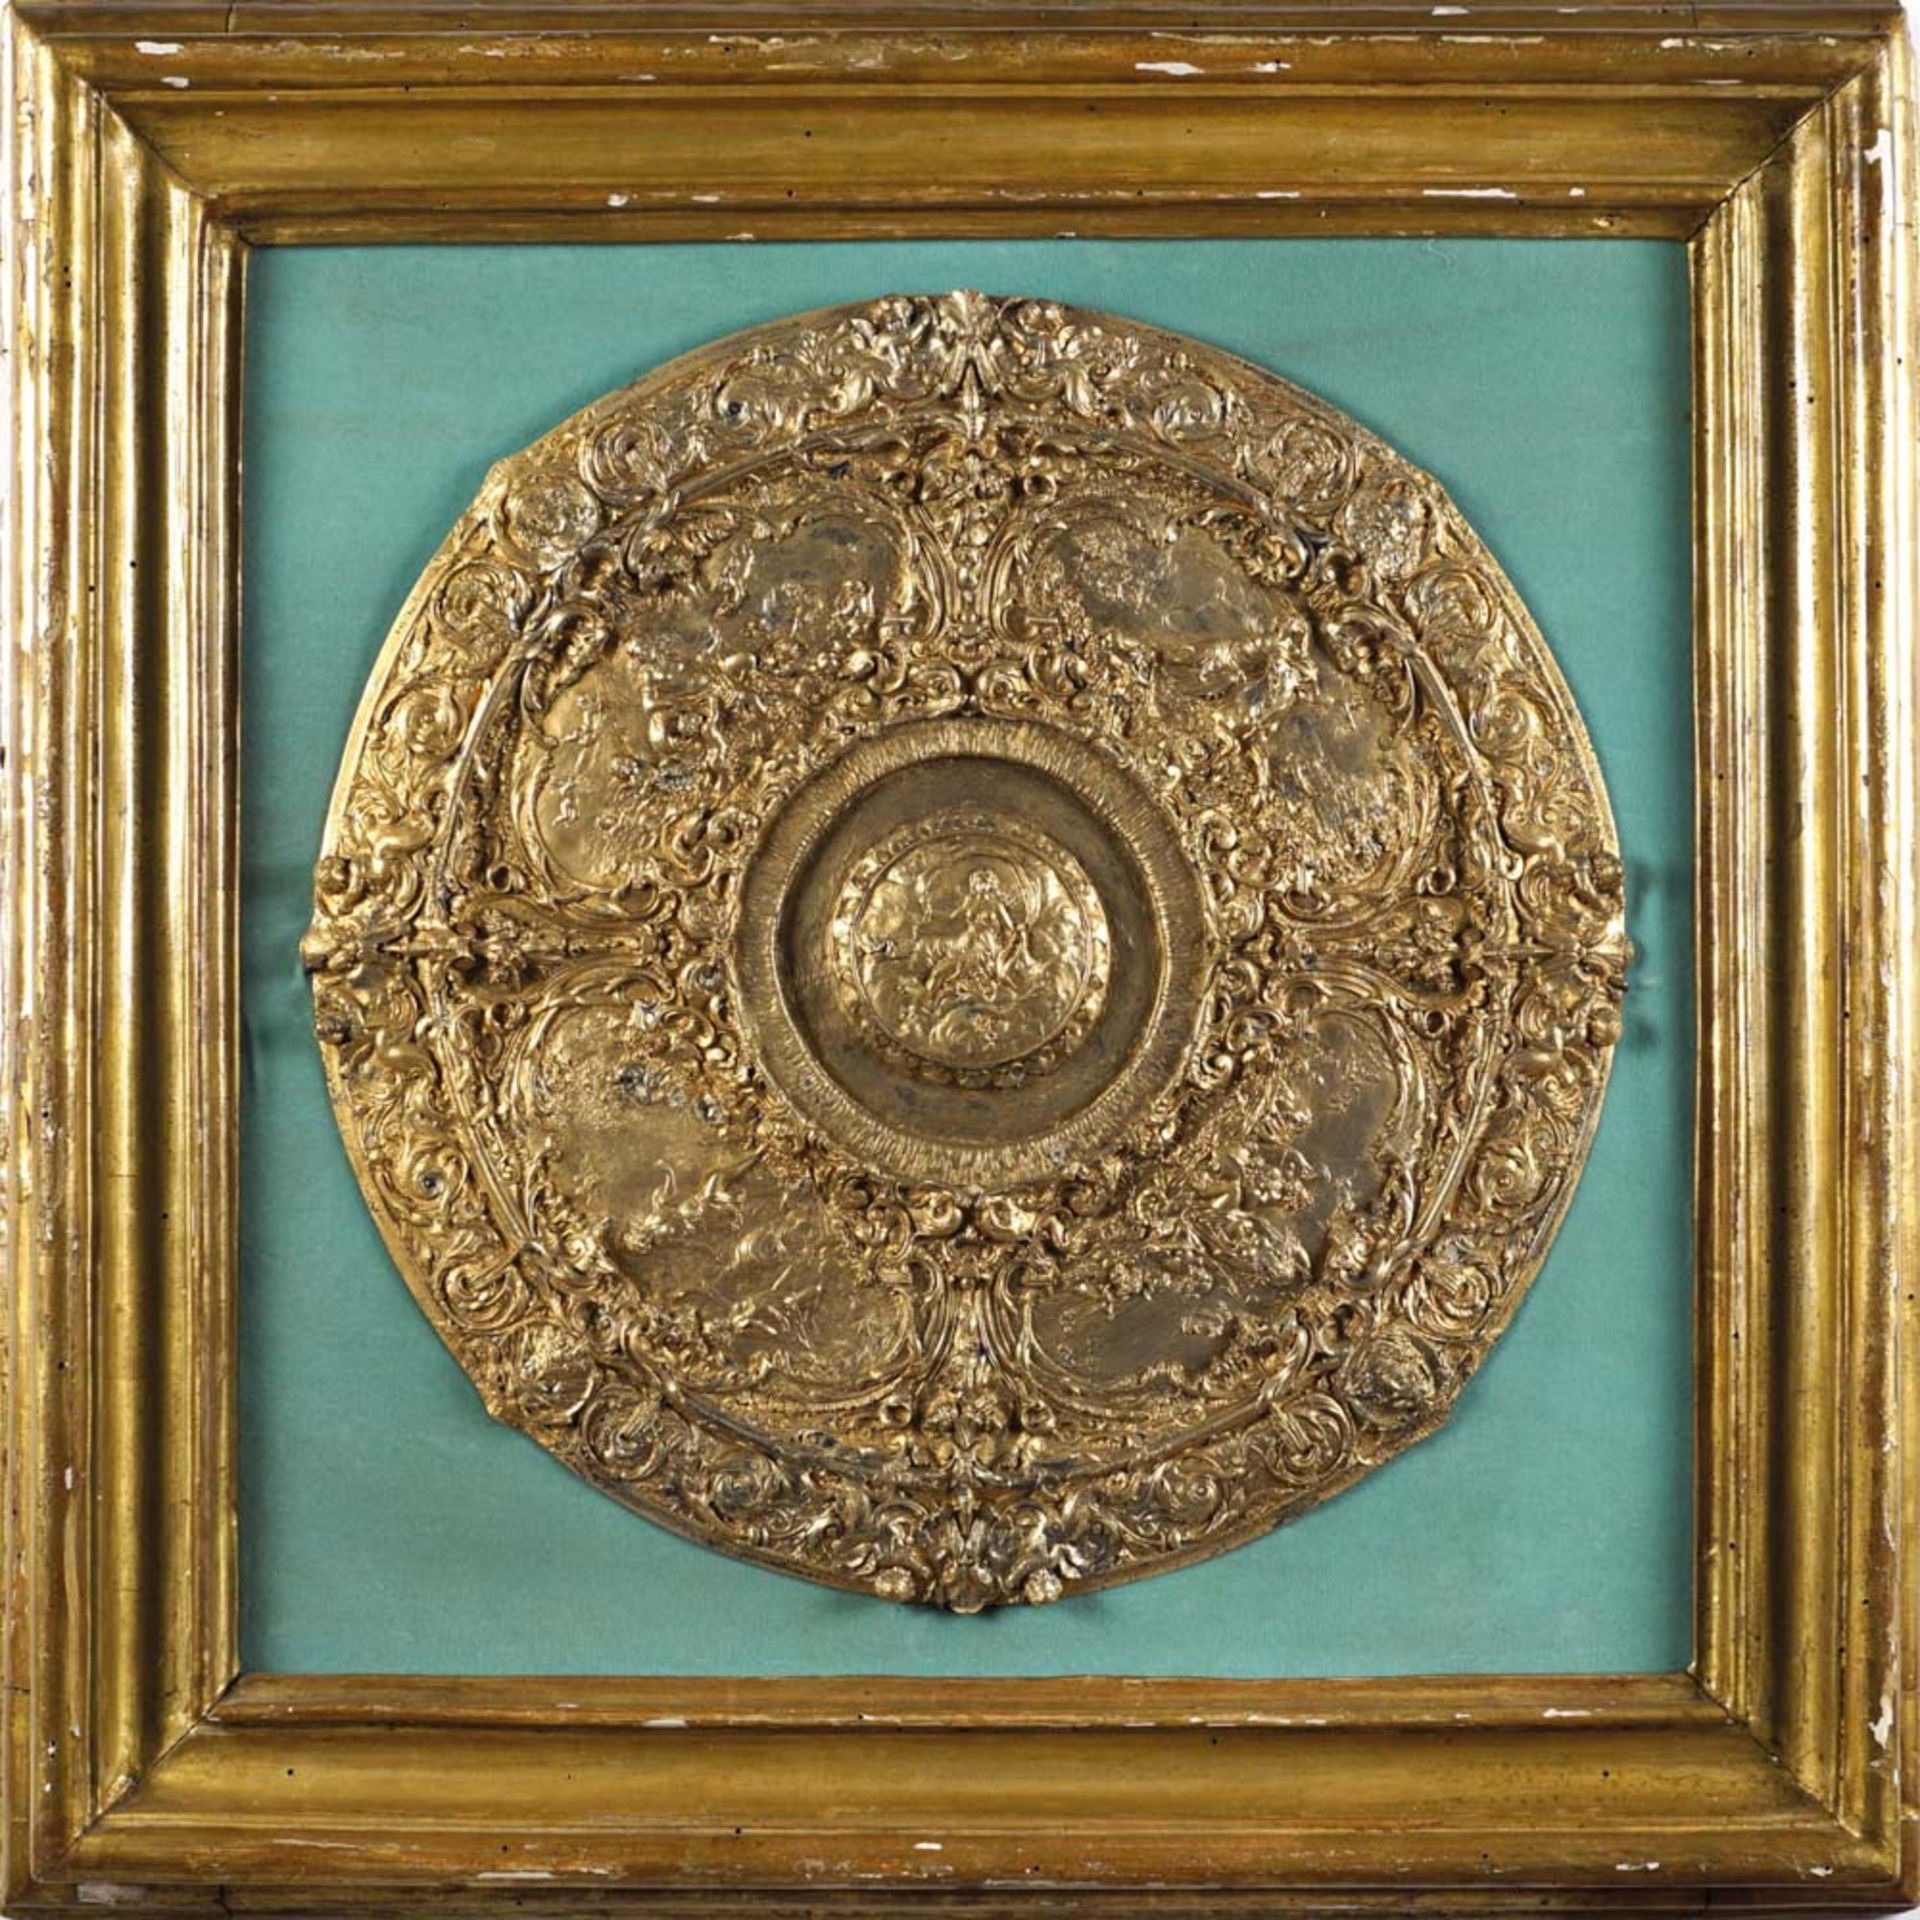 Gilded bronze plate